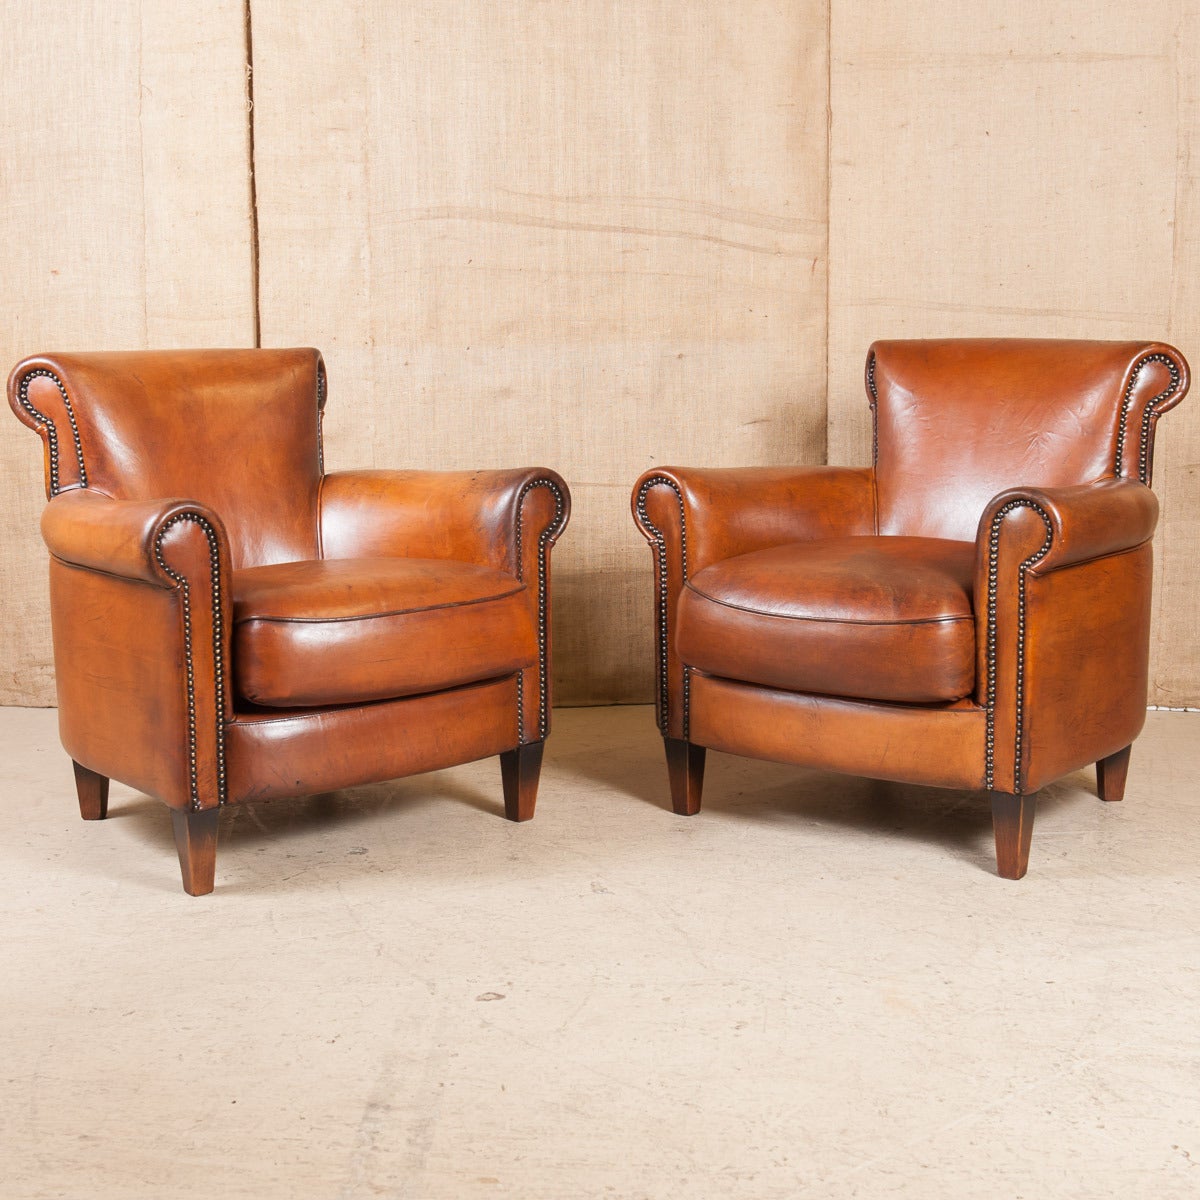 Pair of French Art Deco leather club chairs. Rolled arms and back with nailhead trim. Original leather, professionally reconditioned. The aged patina of these Classic club chairs exudes luxury and character. They are timeless, offering an instant